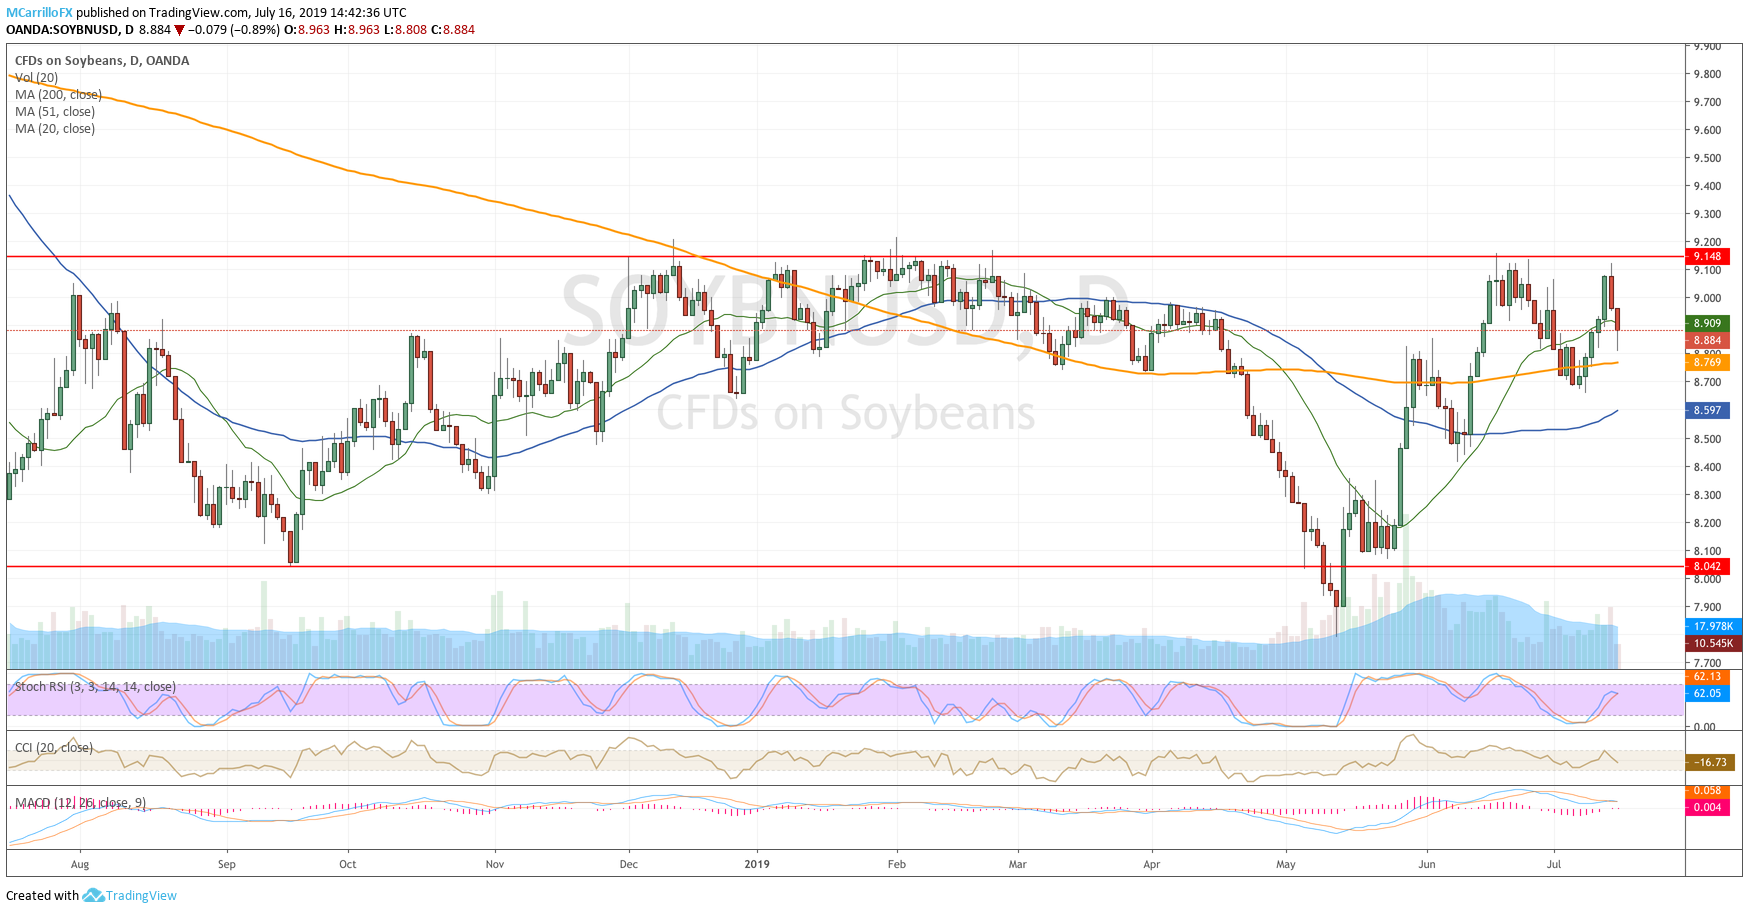 Soybeans daily chart July 16